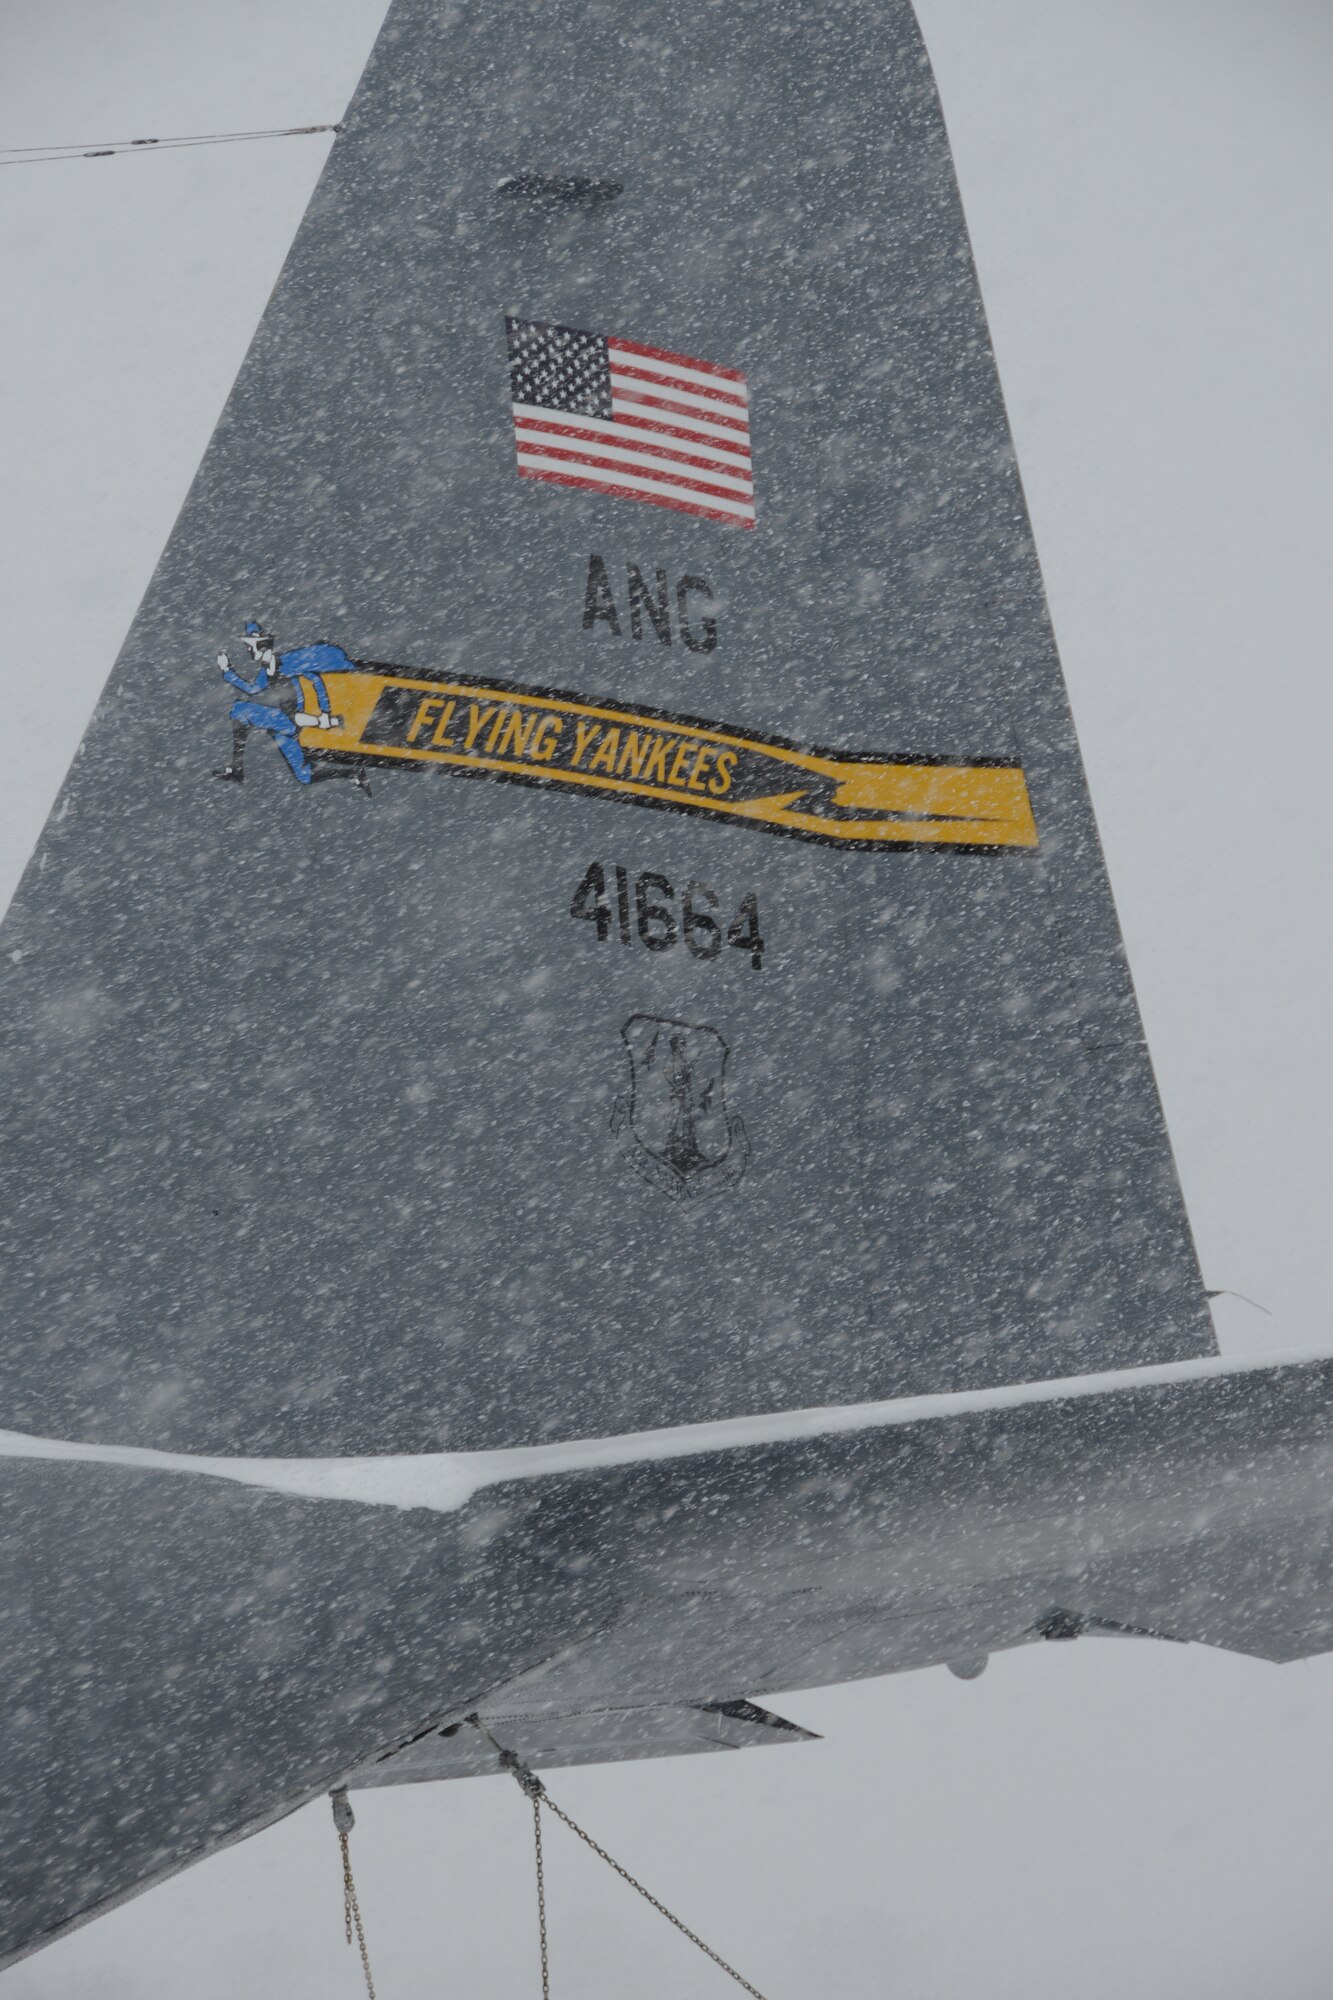 Snow rapidly accumulates on a C-130H aircraft assigned to the 103rd Airlift Wing during a nor’easter at Bradley Air National Guard Base, East Granby, Conn., Feb. 13, 2014. More than 200 Airmen reported to work here and at the Orange Air National Guard Station, ready to answer the call in the event the state required assistance during the height of the storm.  (U.S. Air National Guard photo by Maj. Bryon M. Turner)